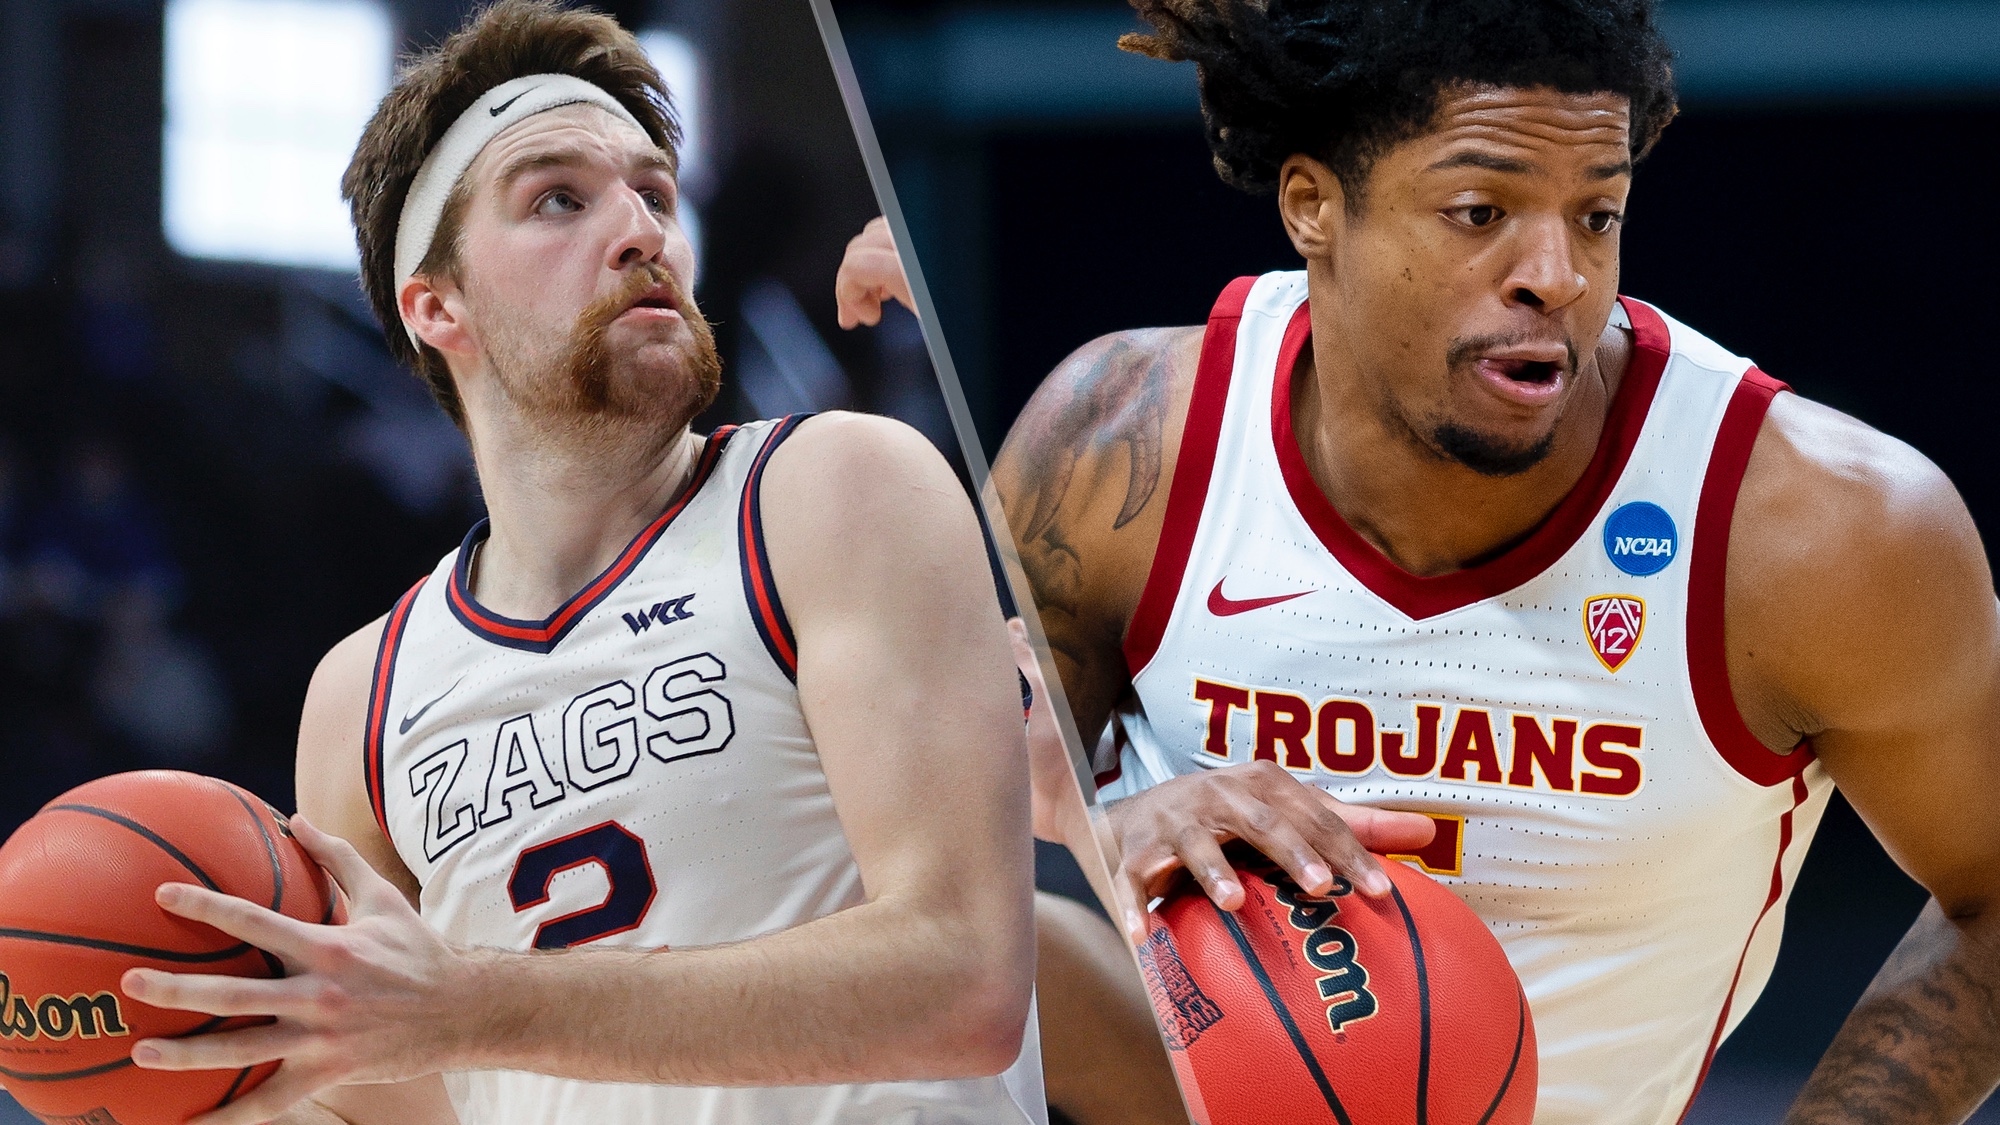 Gonzaga vs USC live stream How to watch Elite 8 game online Tom's Guide